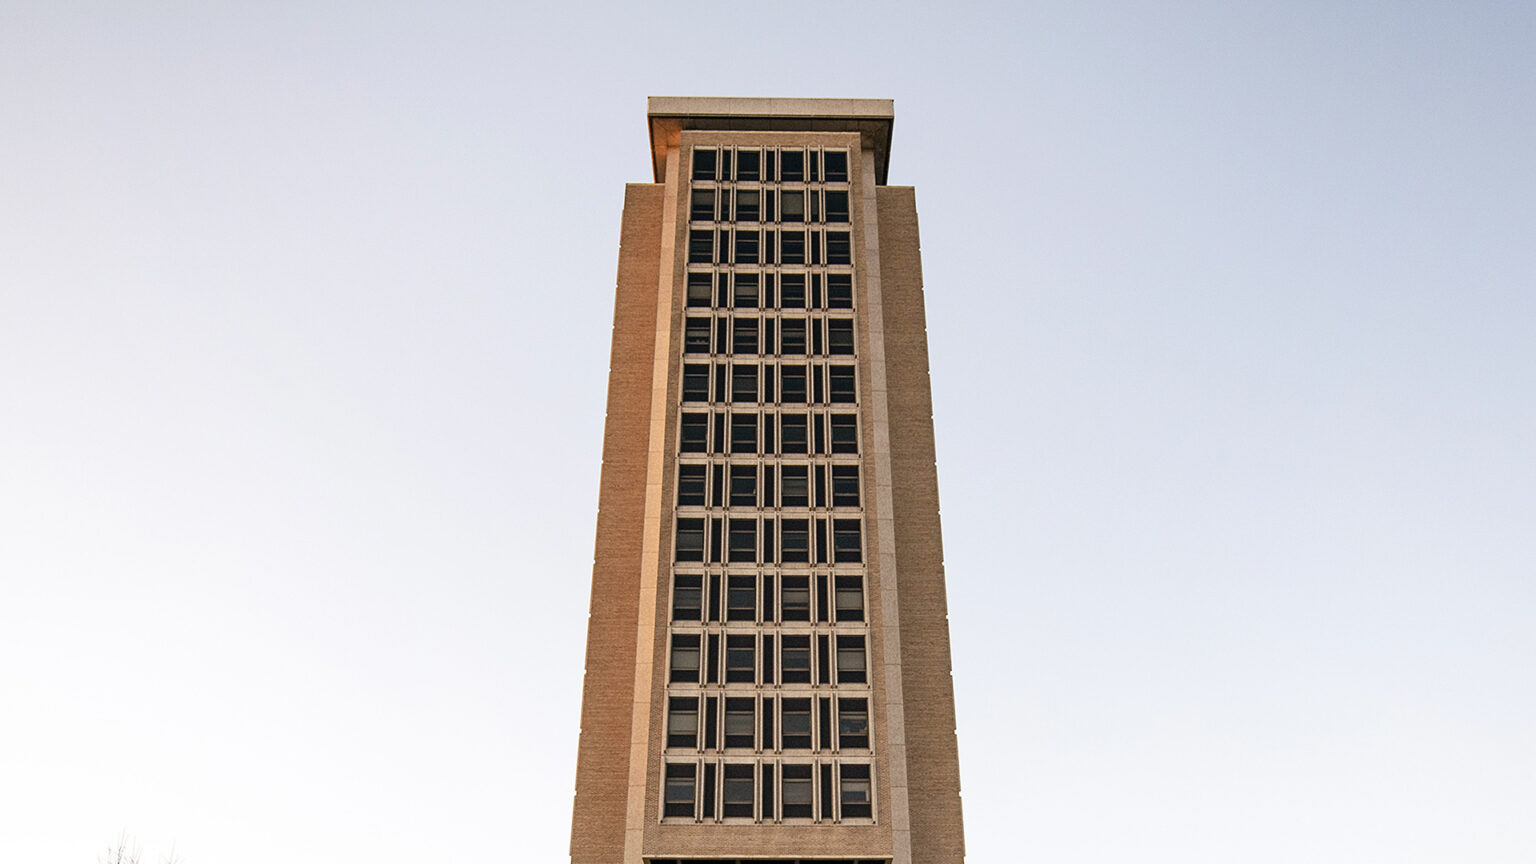 A tower with a brick-and-concrete surface framing 13 stories with four windows apiece stands under a cloudless sky, with sunshine illuminating one side of the building.